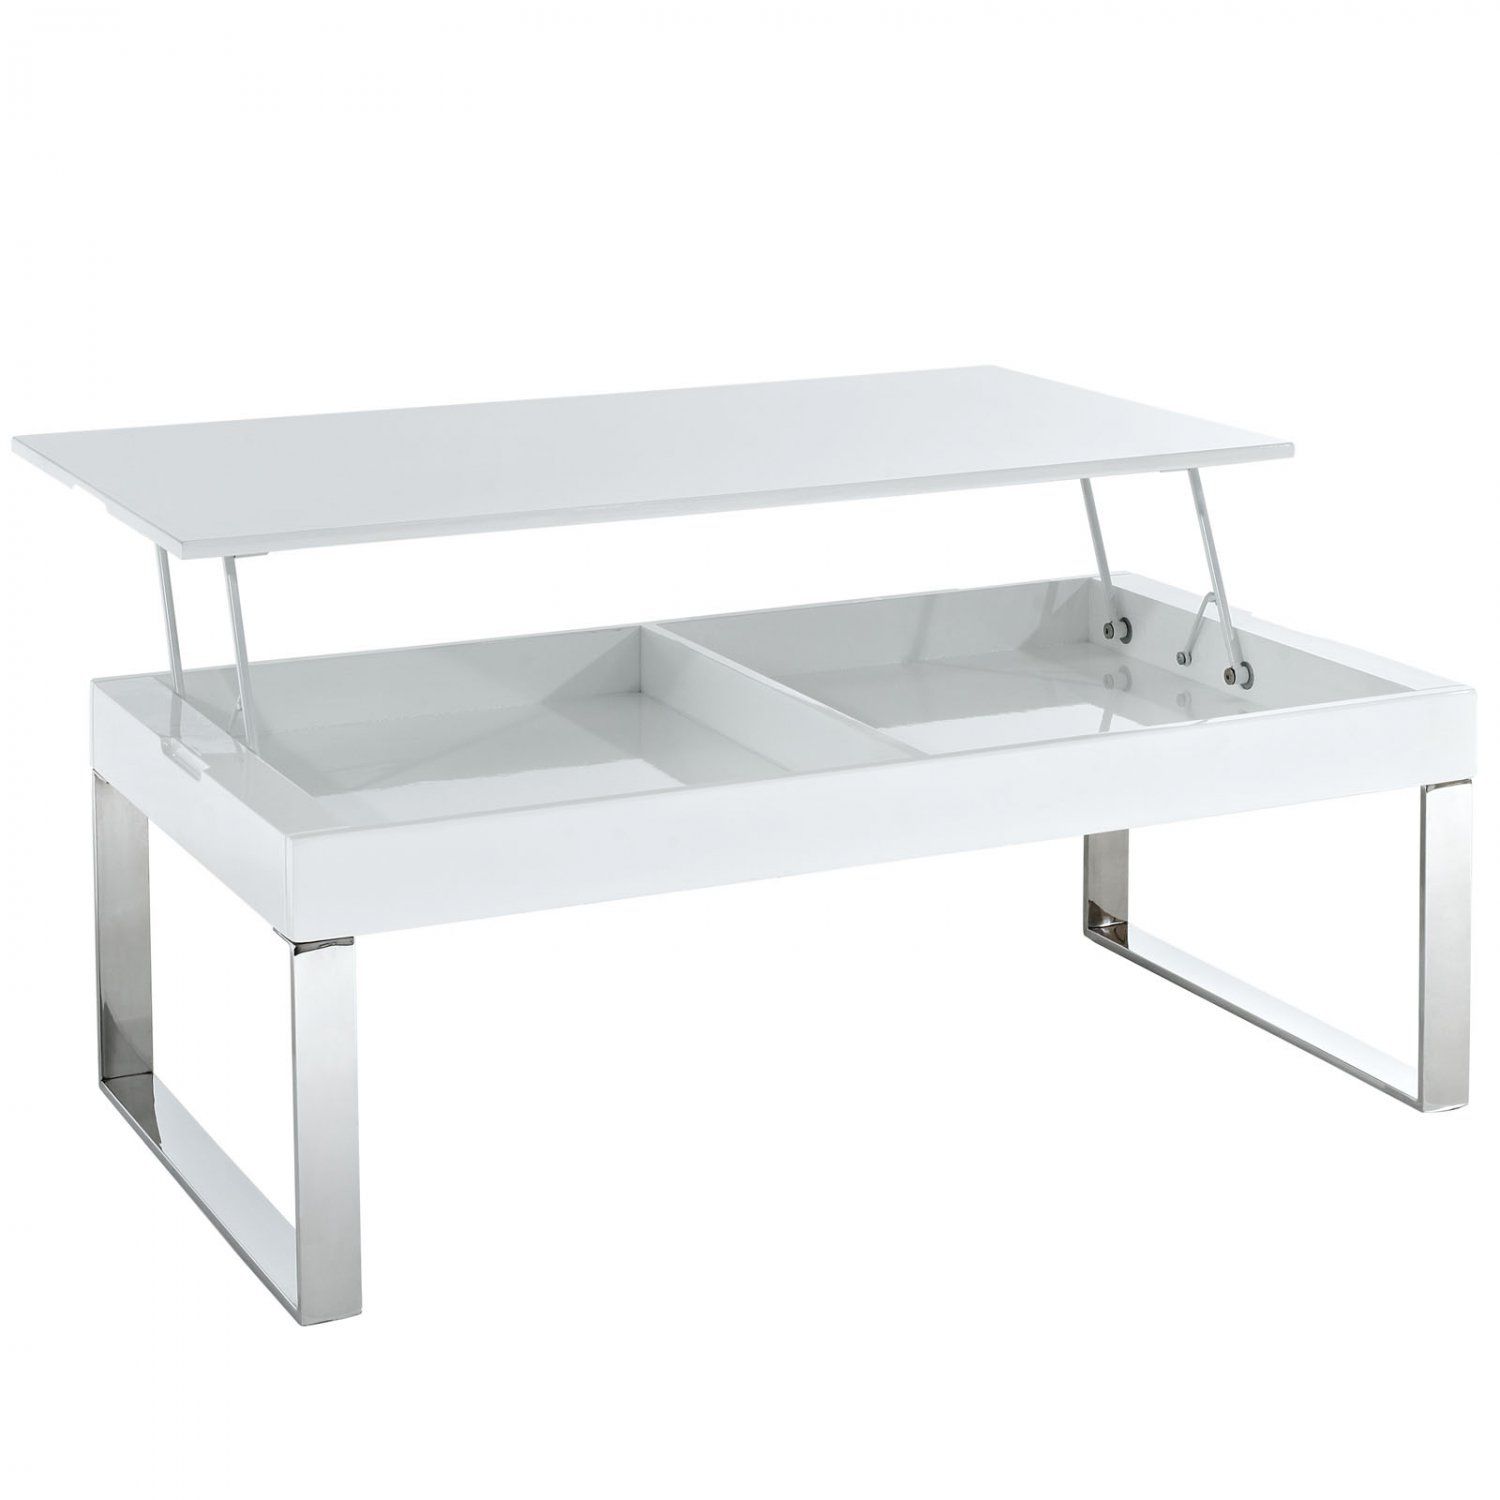 White Gloss Lift Coffee Table Intended For High Gloss Lift Top Coffee Tables (View 8 of 21)